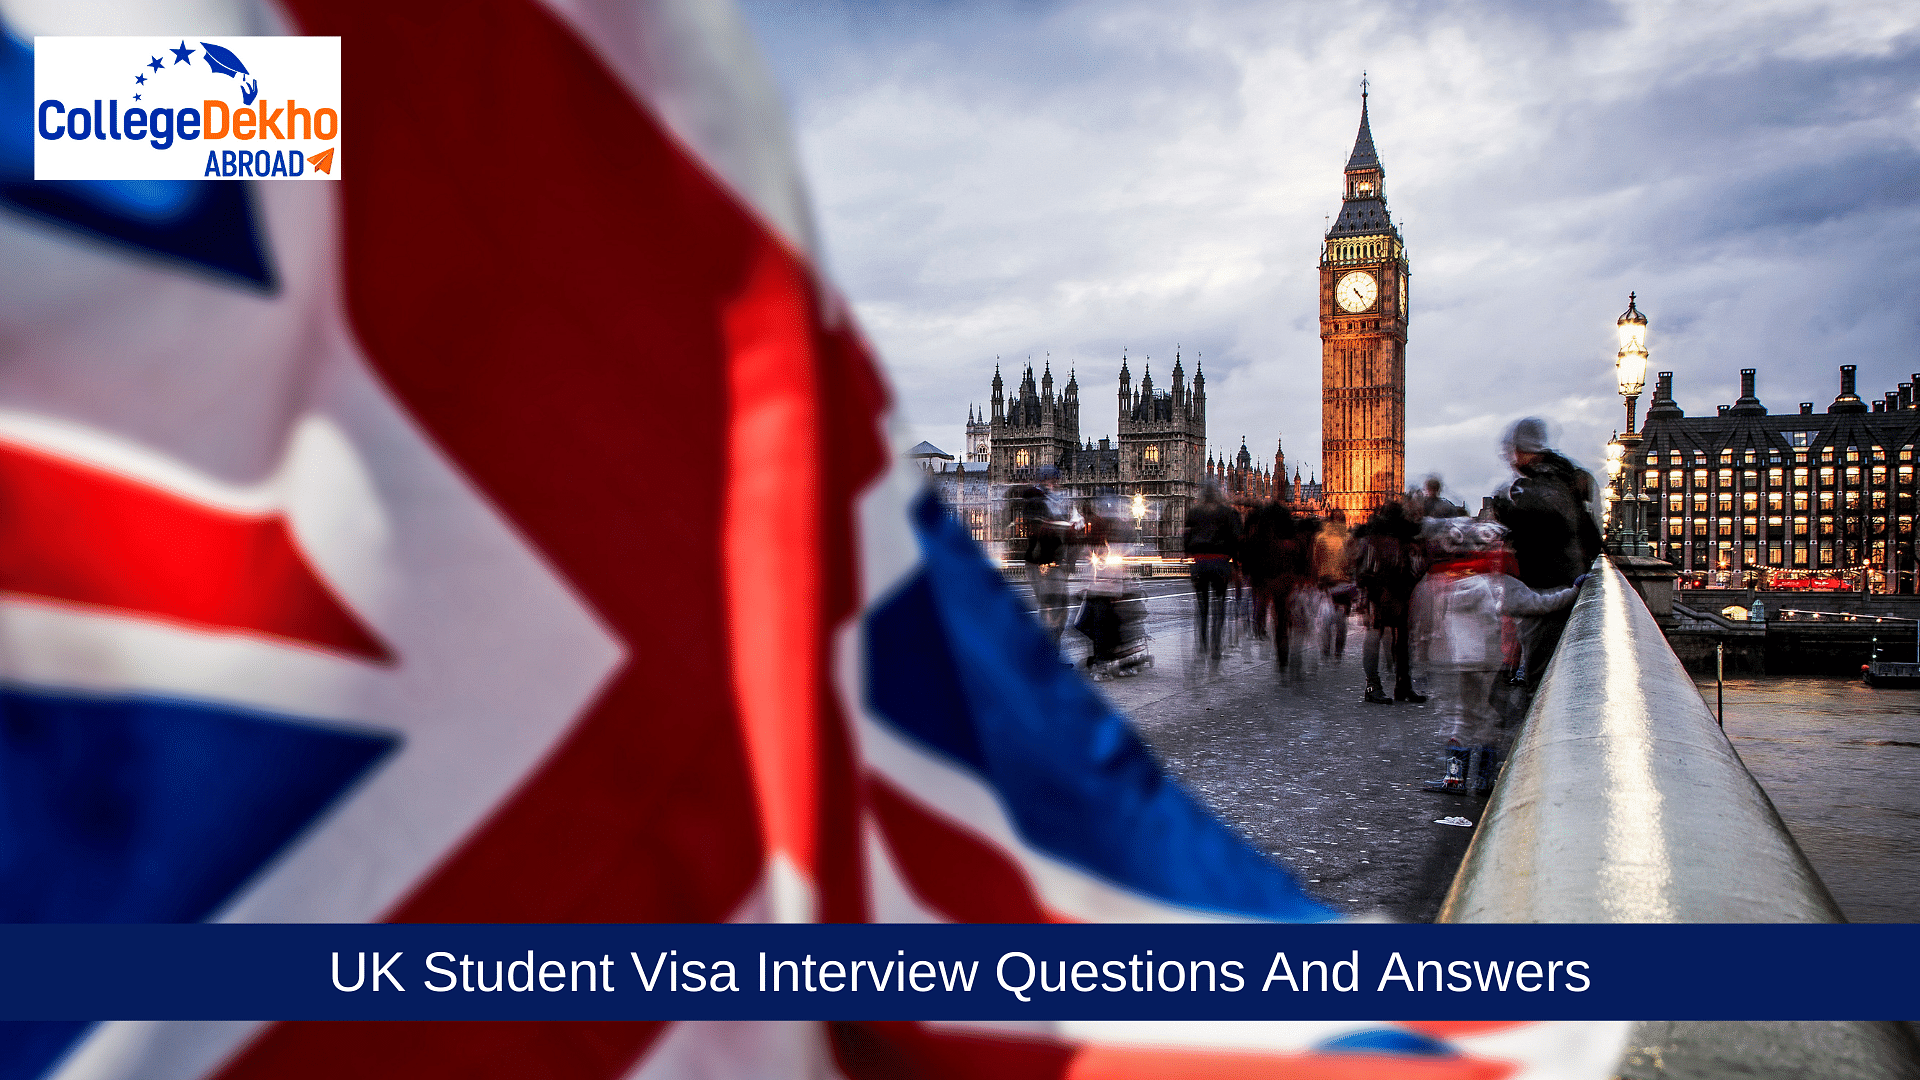 UK Student Visa Interview Questions And Answers